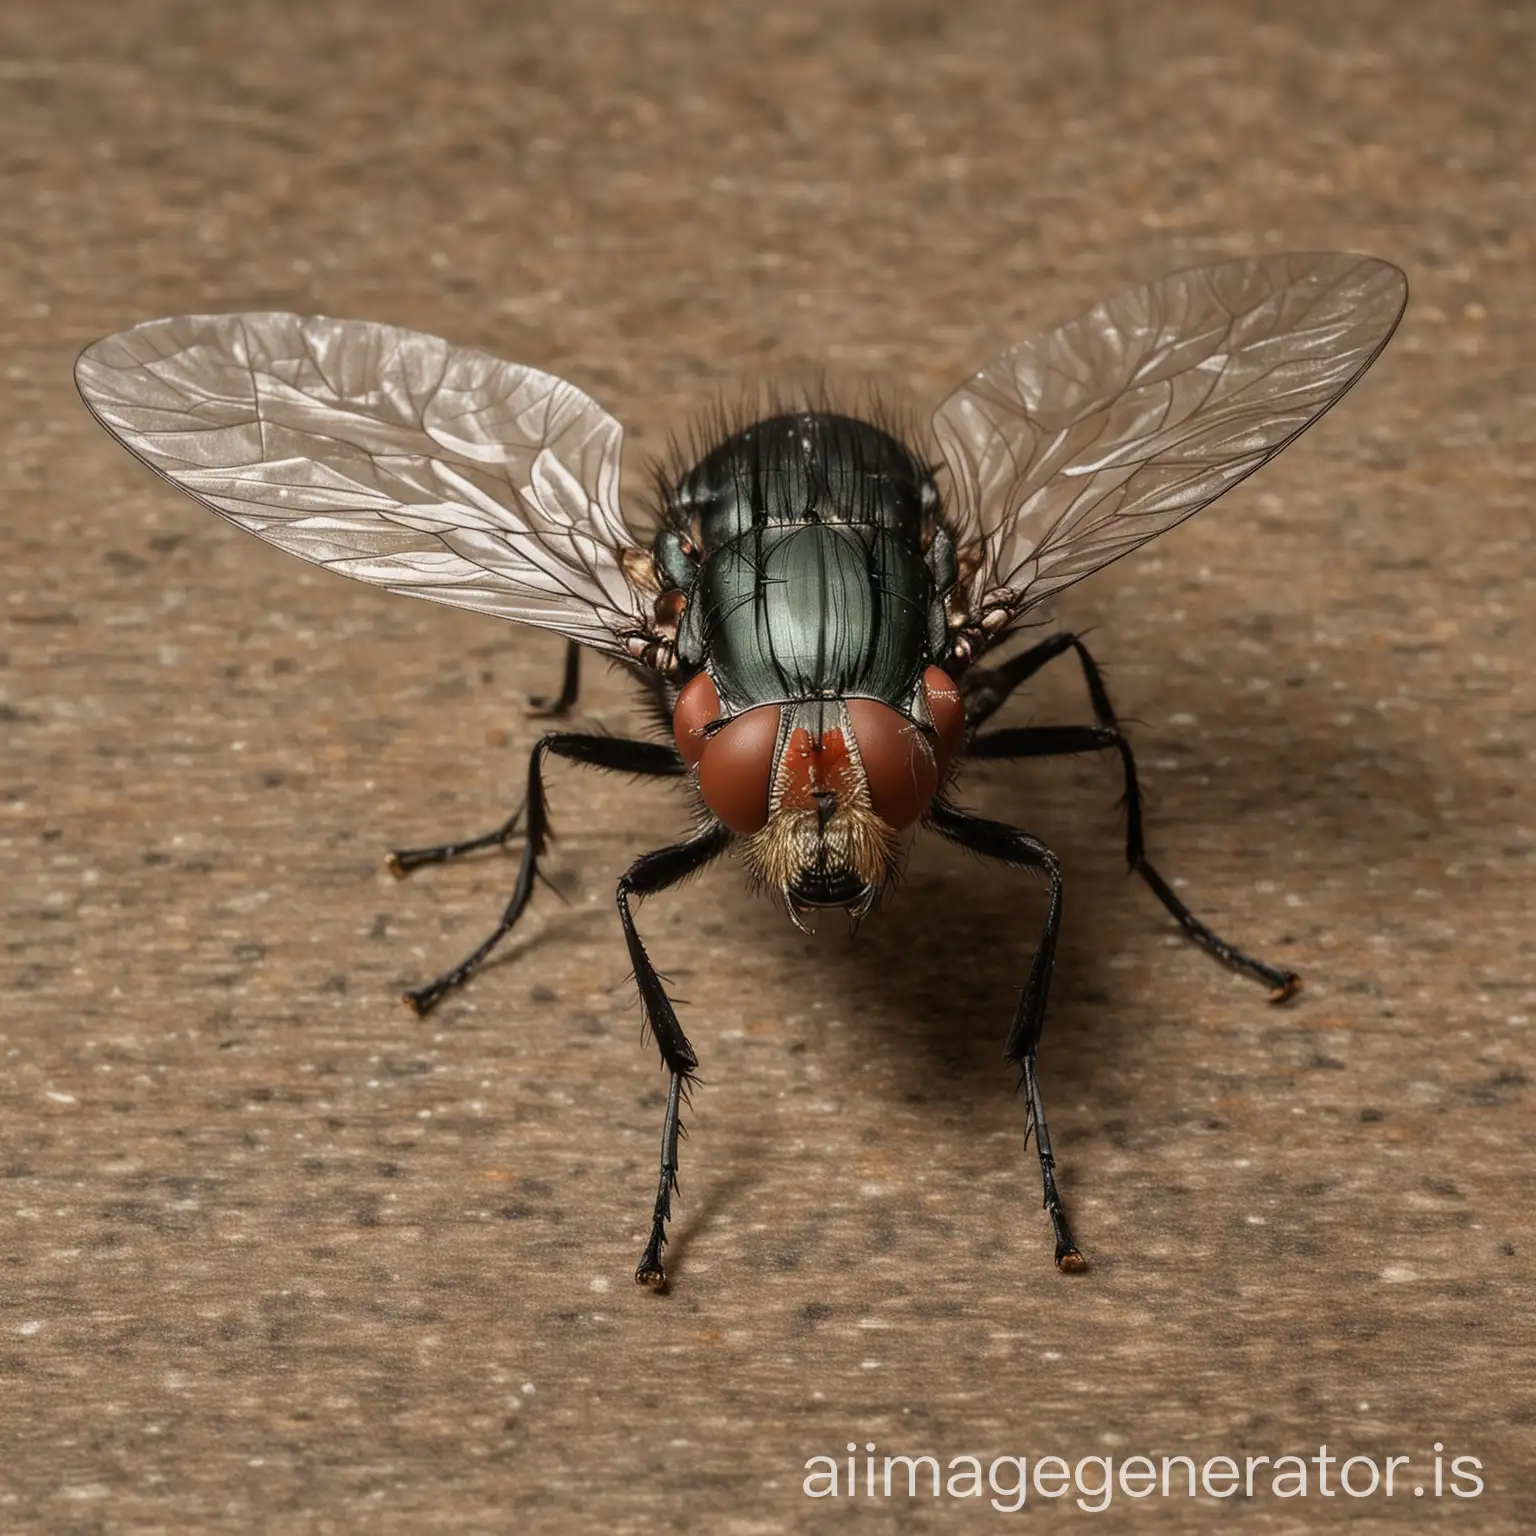 Vibrant-Full-Body-Fly-Art-Dynamic-Insect-in-Colorful-Motion